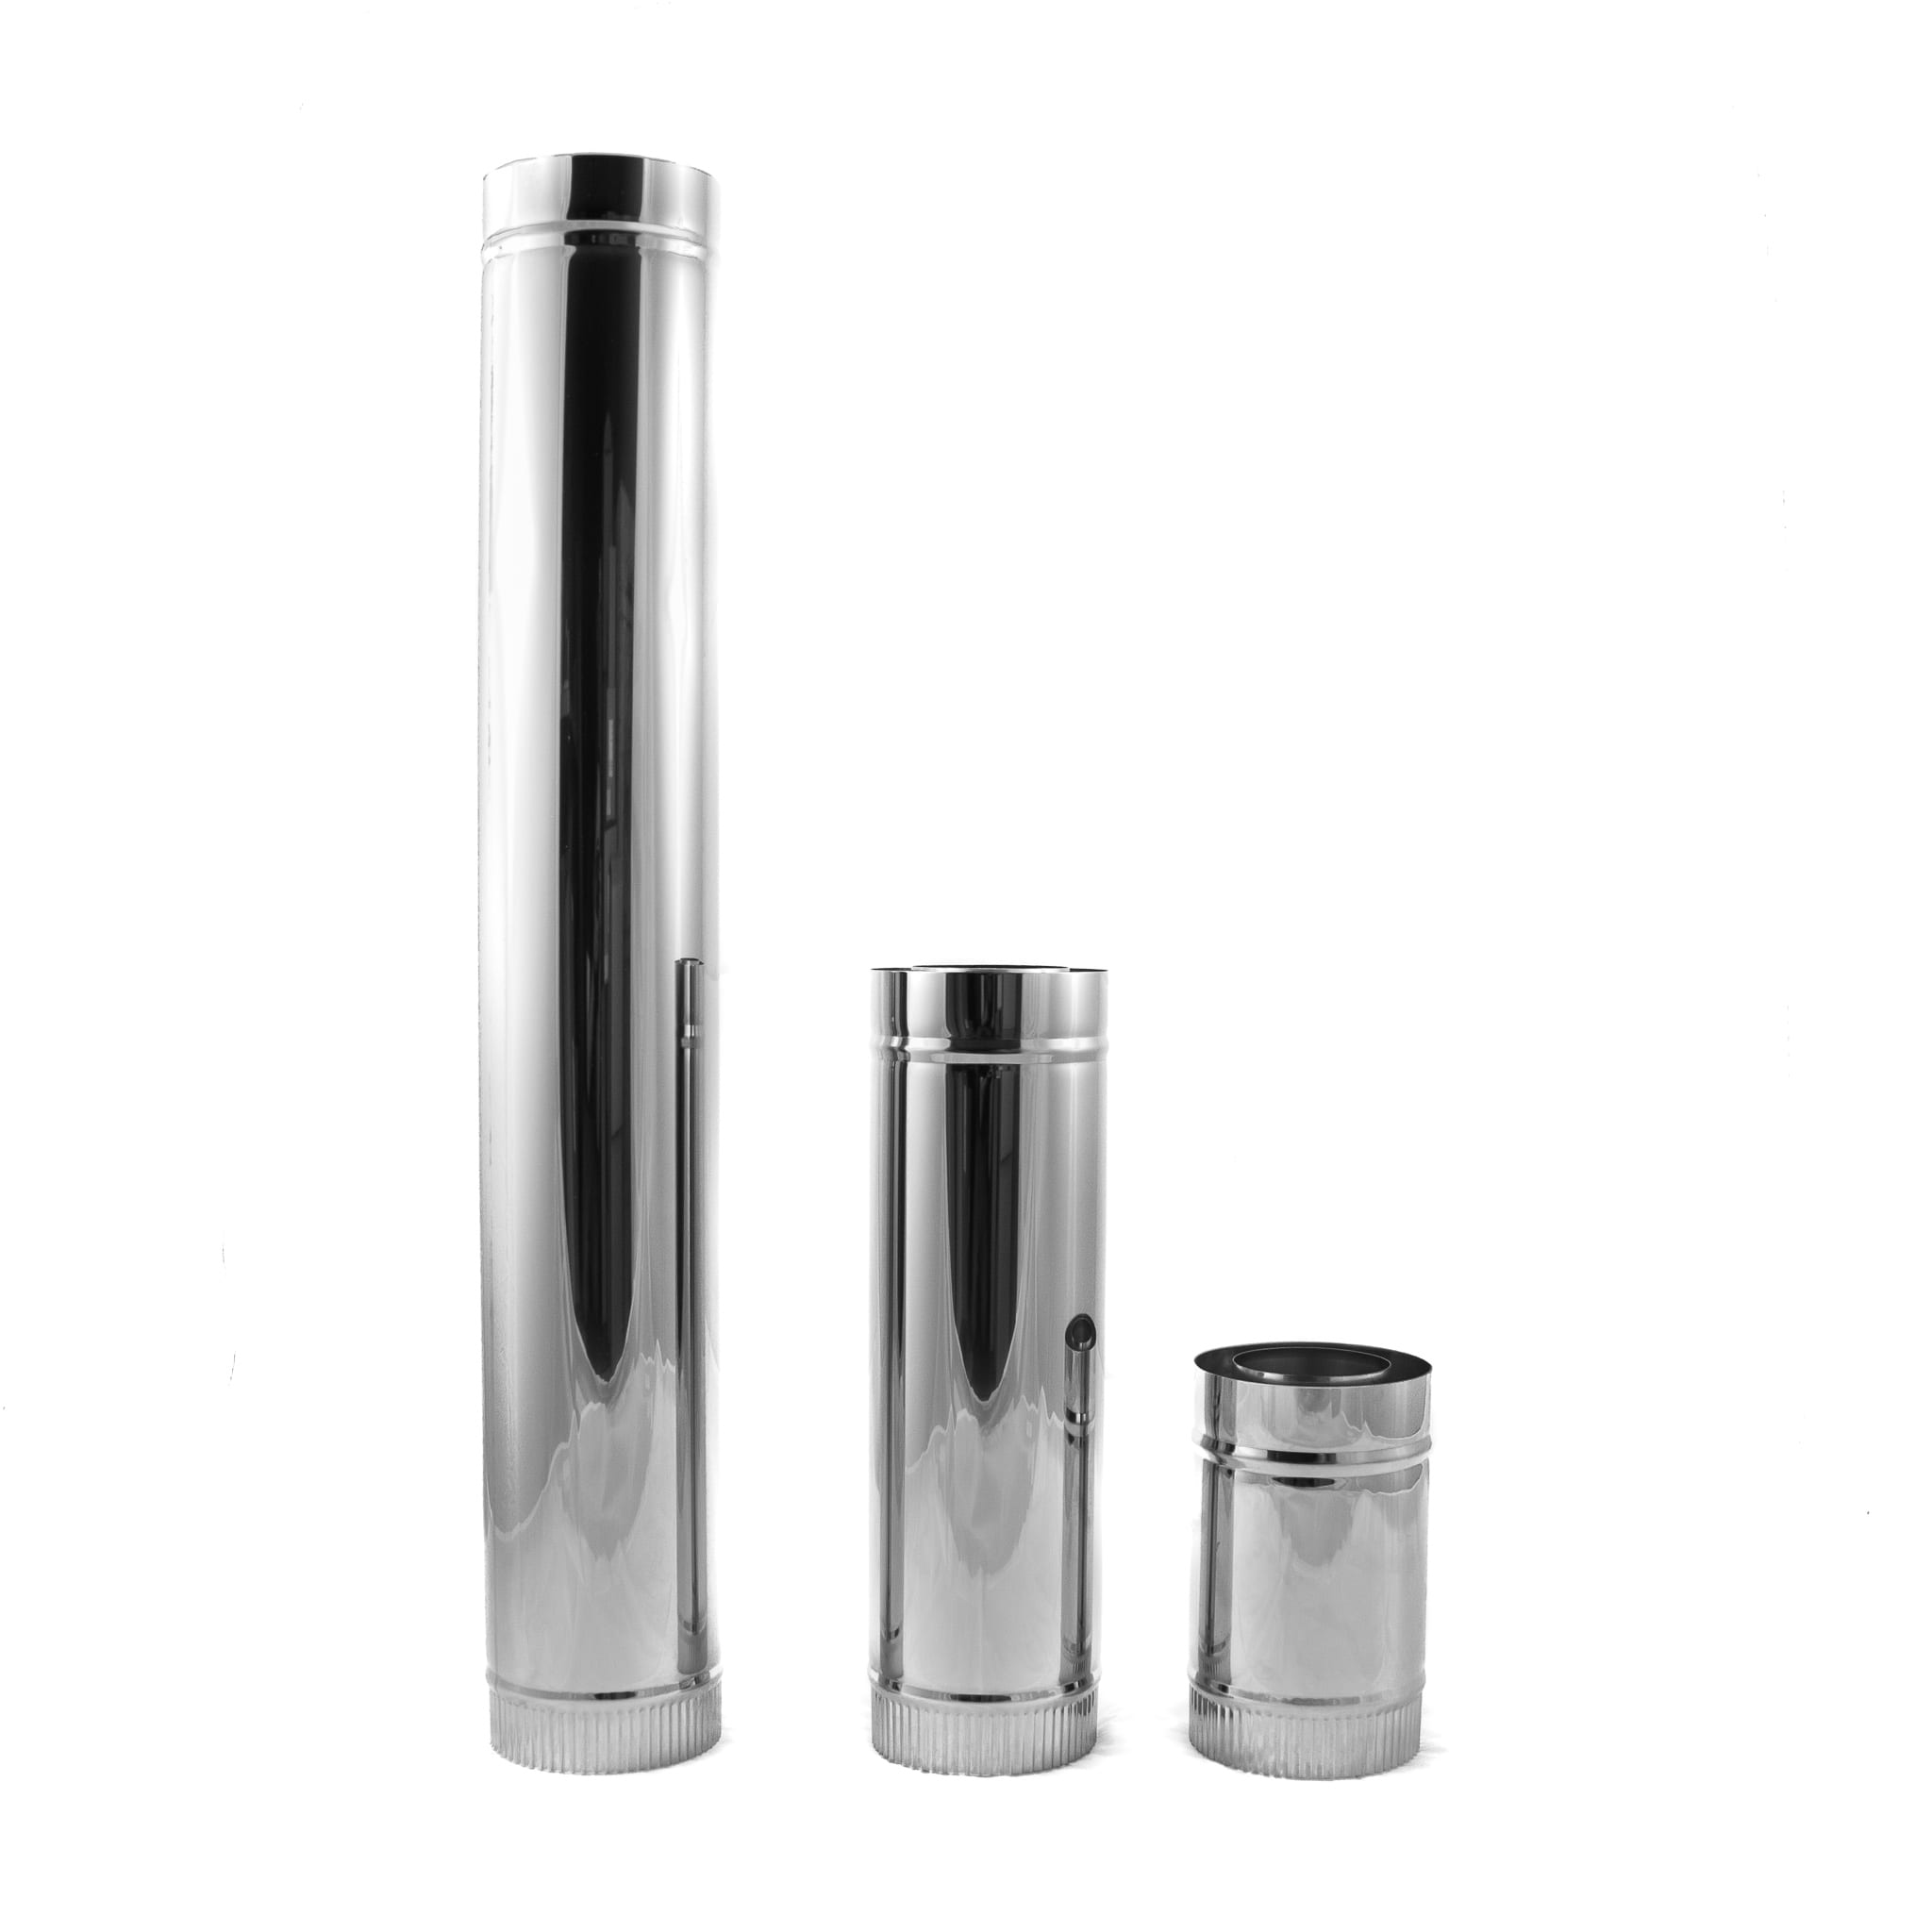 4 Insulated Stainless-Steel Chimney Pipe - Tiny Wood Stove